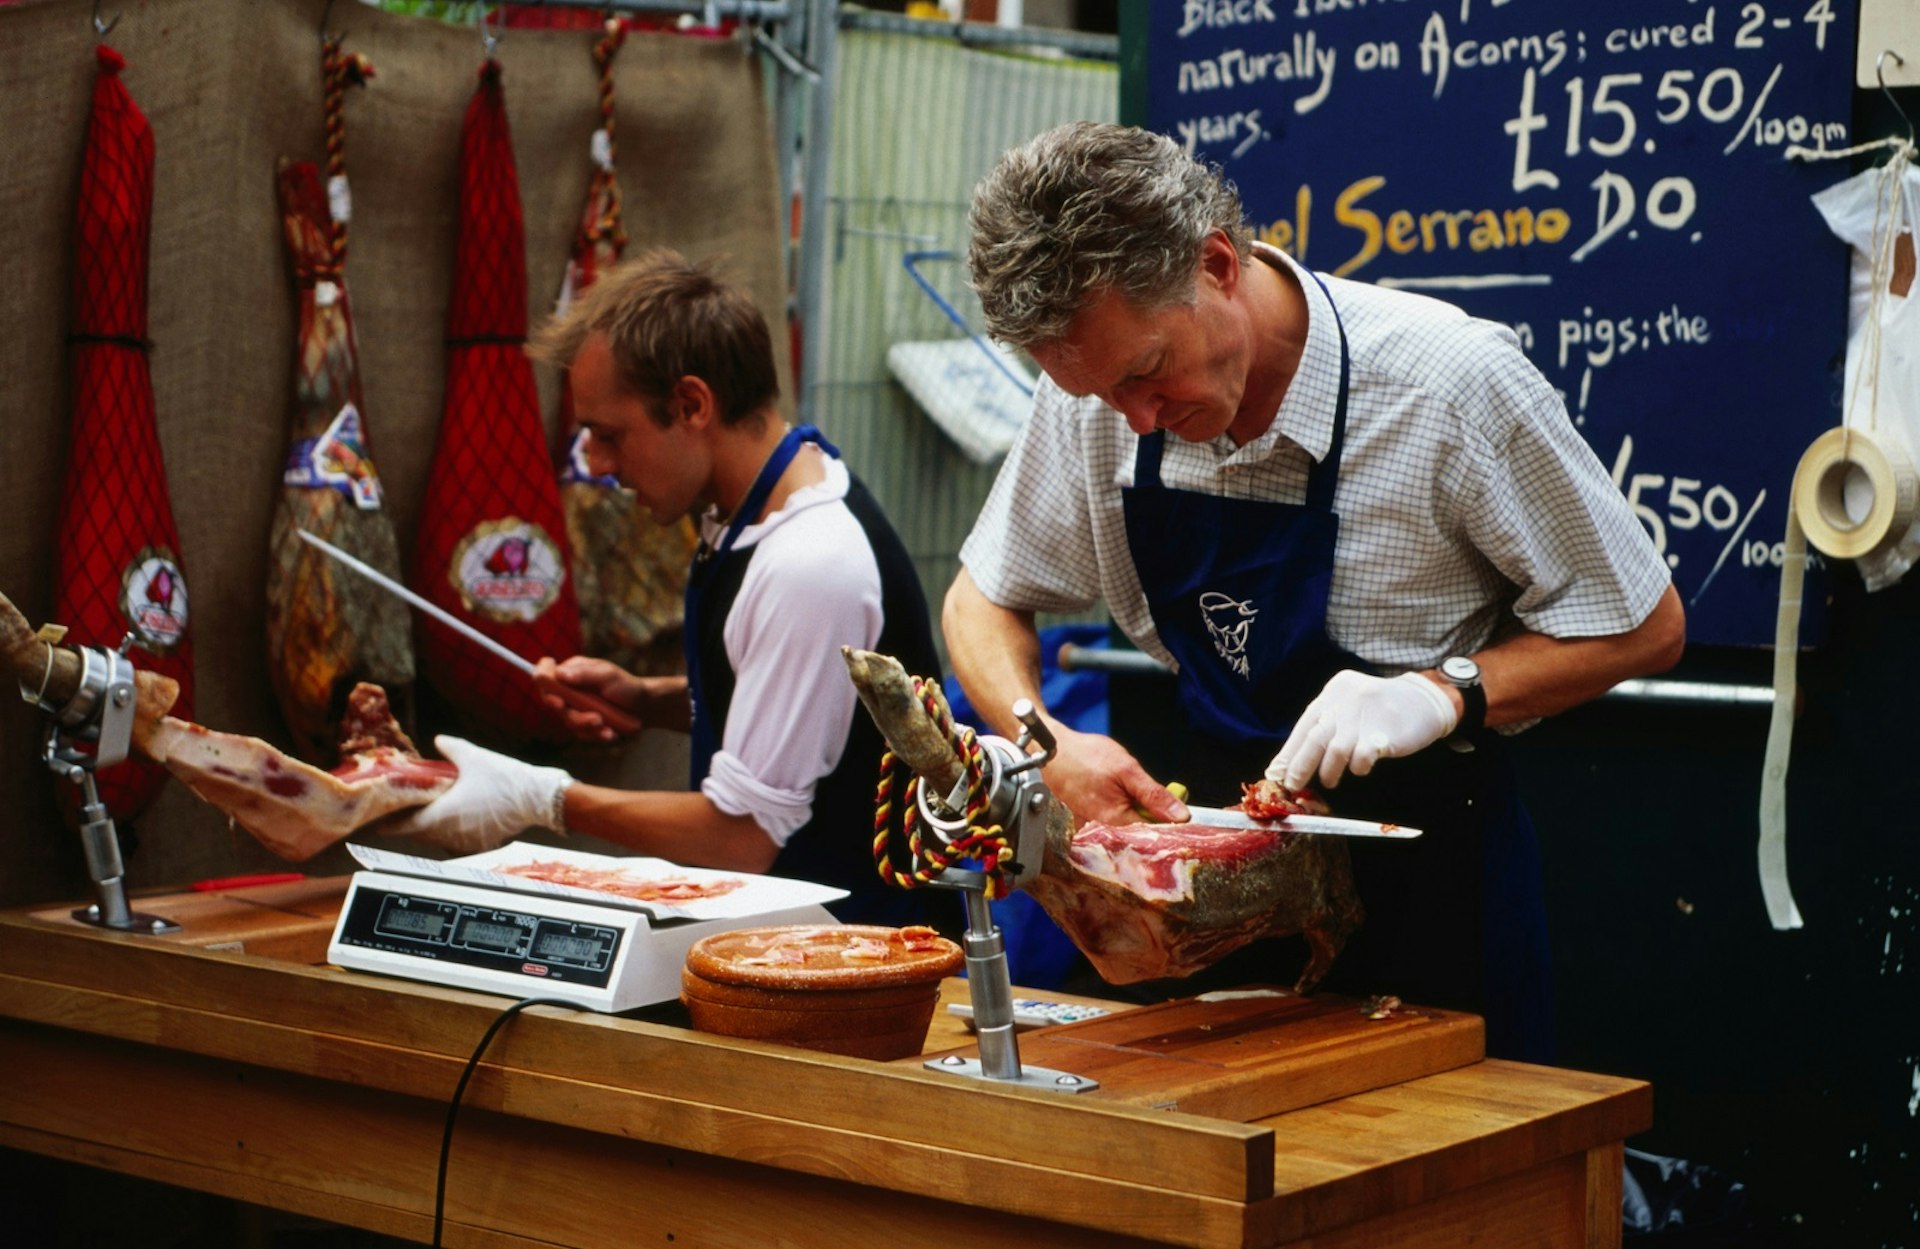 Two market workers in aprons carve jamón directly from the joint at a stall Borough Market